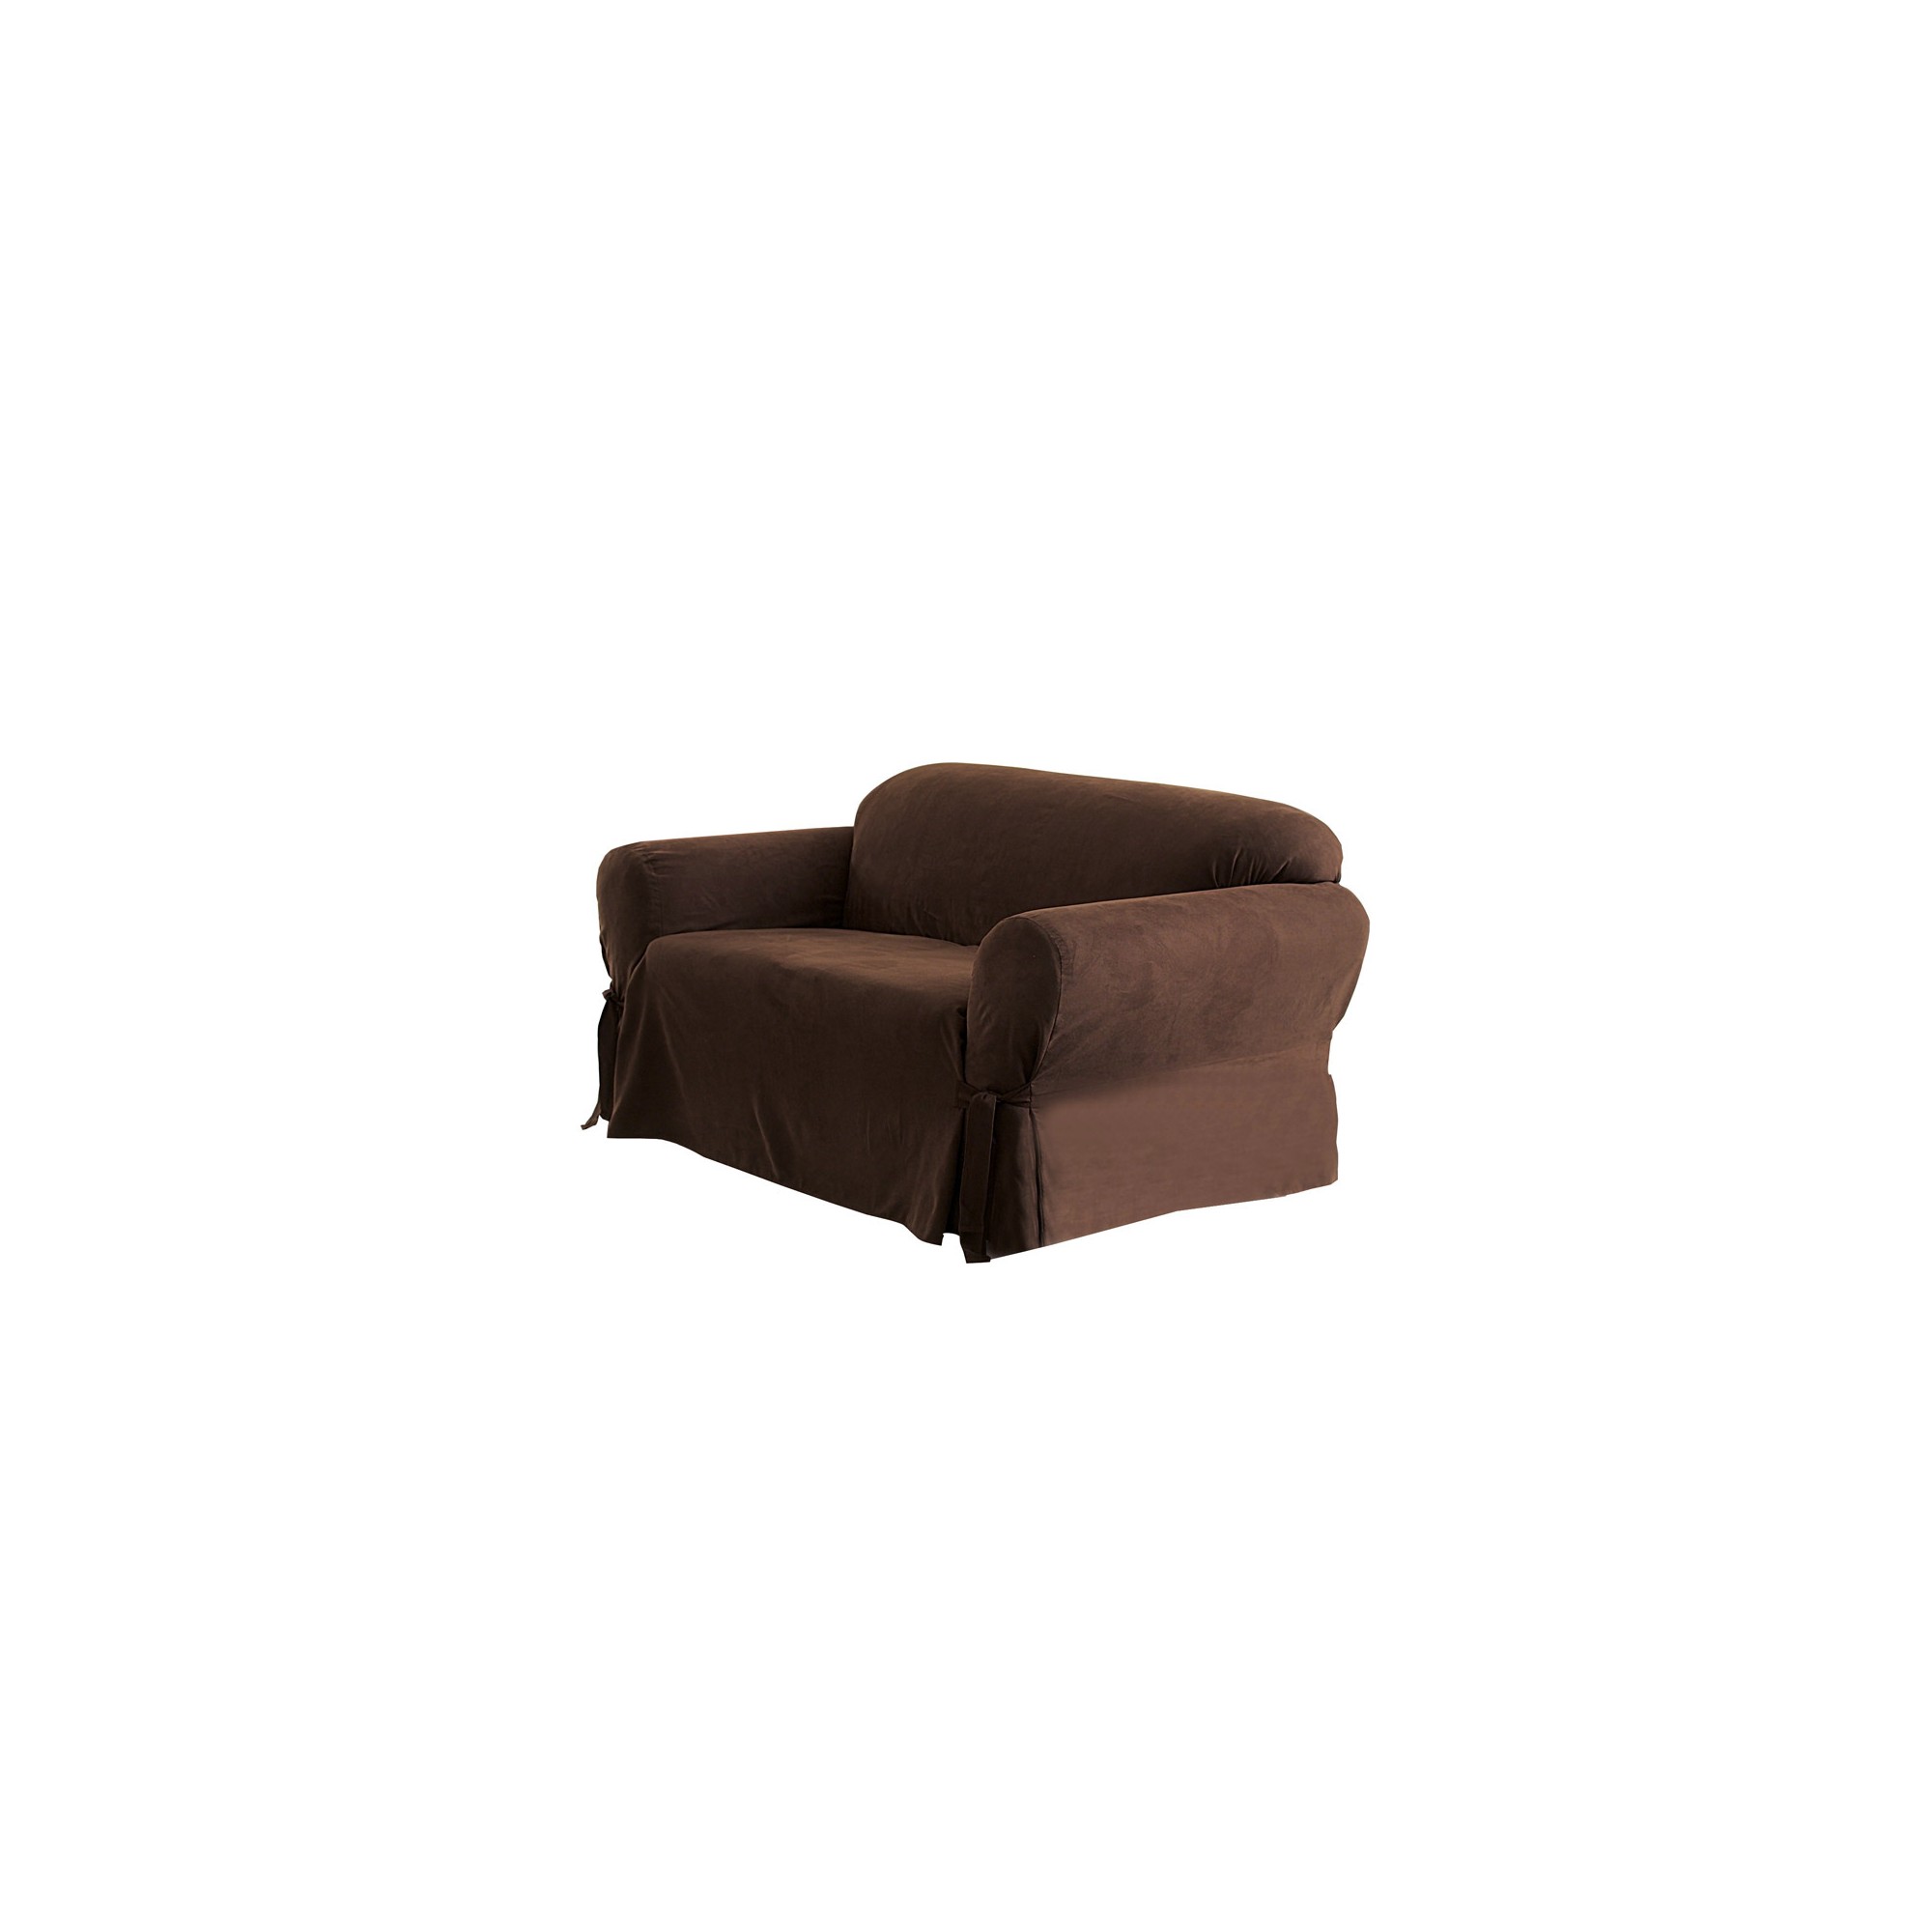 Soft Suede Loveseat Slipcover Chocolate - Sure Fit, Brown